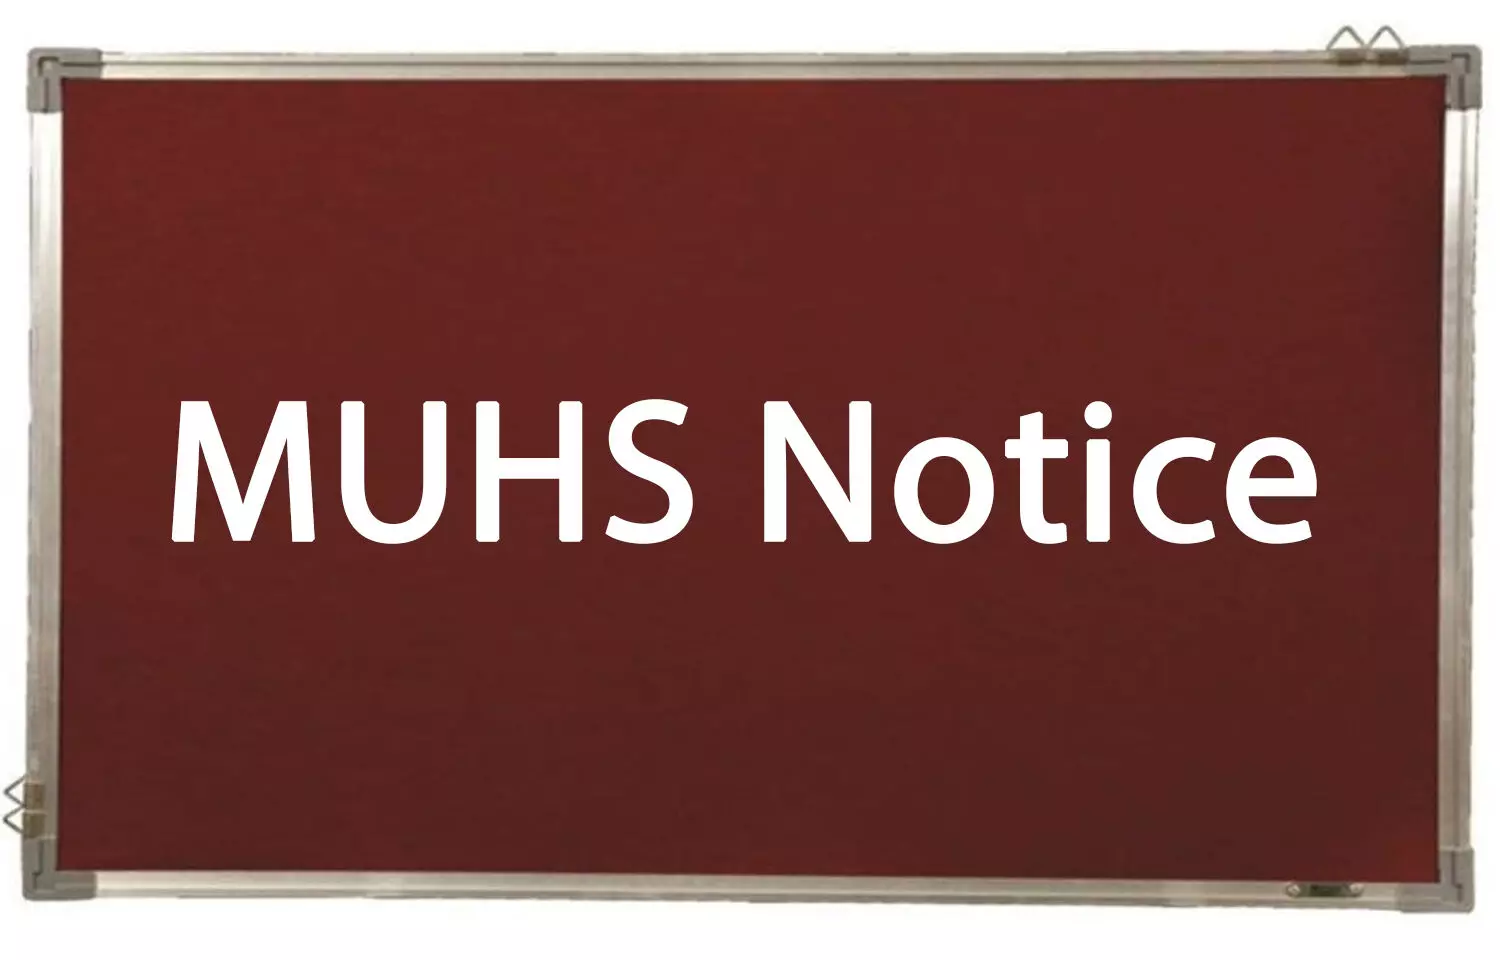 MUHS publishes eligibility criteria, duration of Fellowship courses, Details